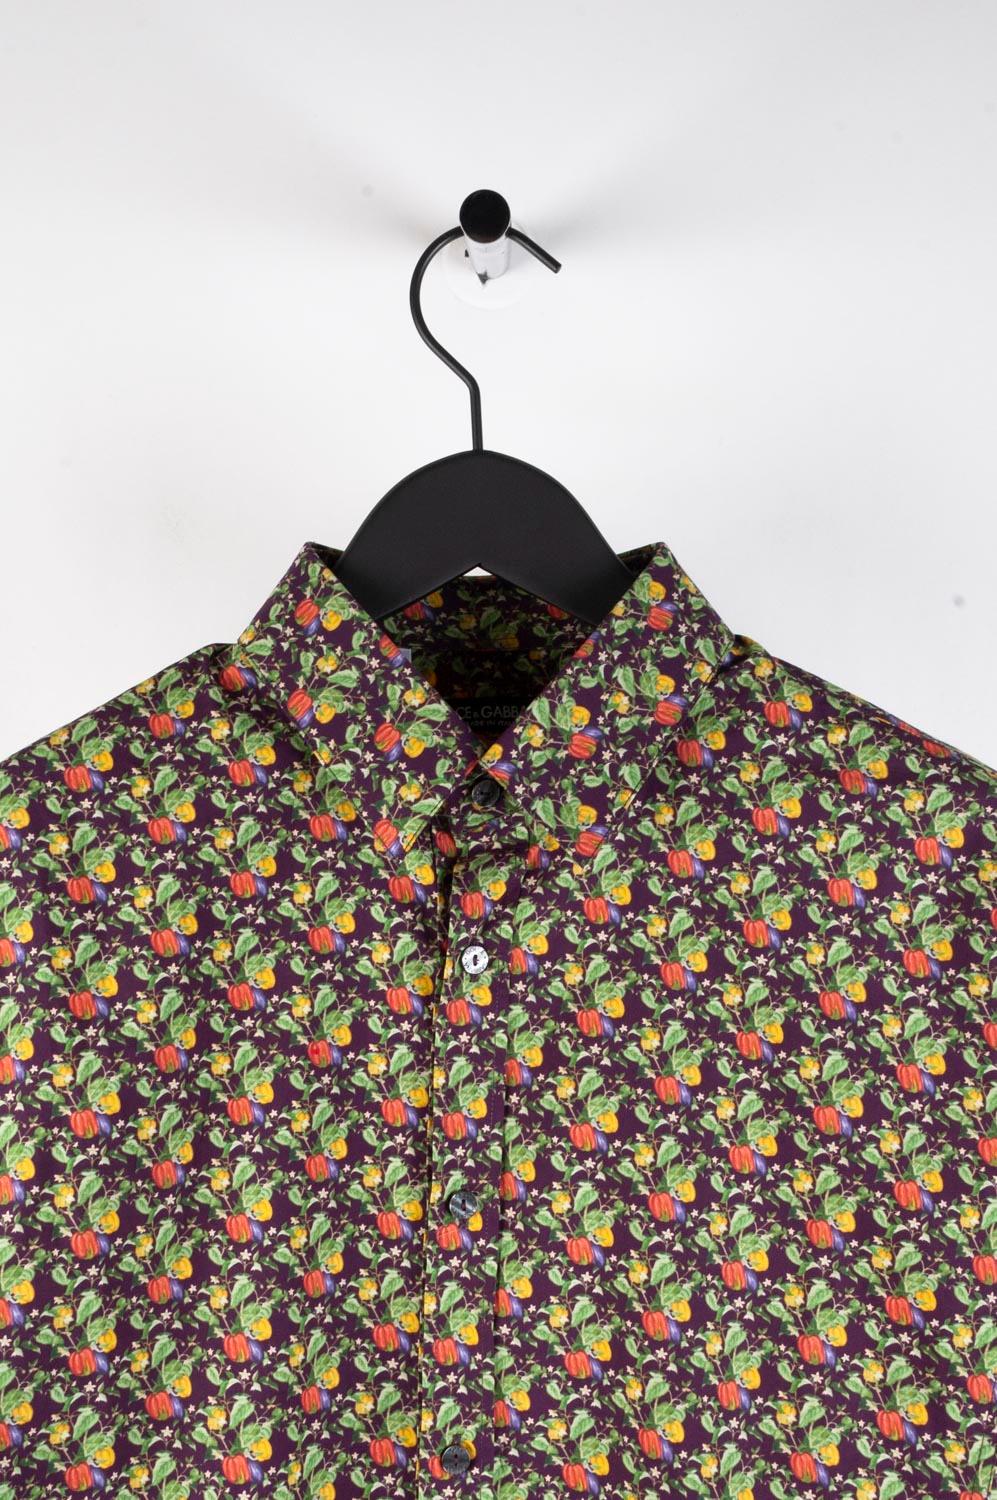 Item for sale is 100% genuine Dolce&Gabbana Men Shirt, S437
Color: Multicolor
(An actual color may a bit vary due to individual computer screen interpretation)
Material: No care label, seems cotton
Tag size:40/15.75 runs S/M 
This shirt is great